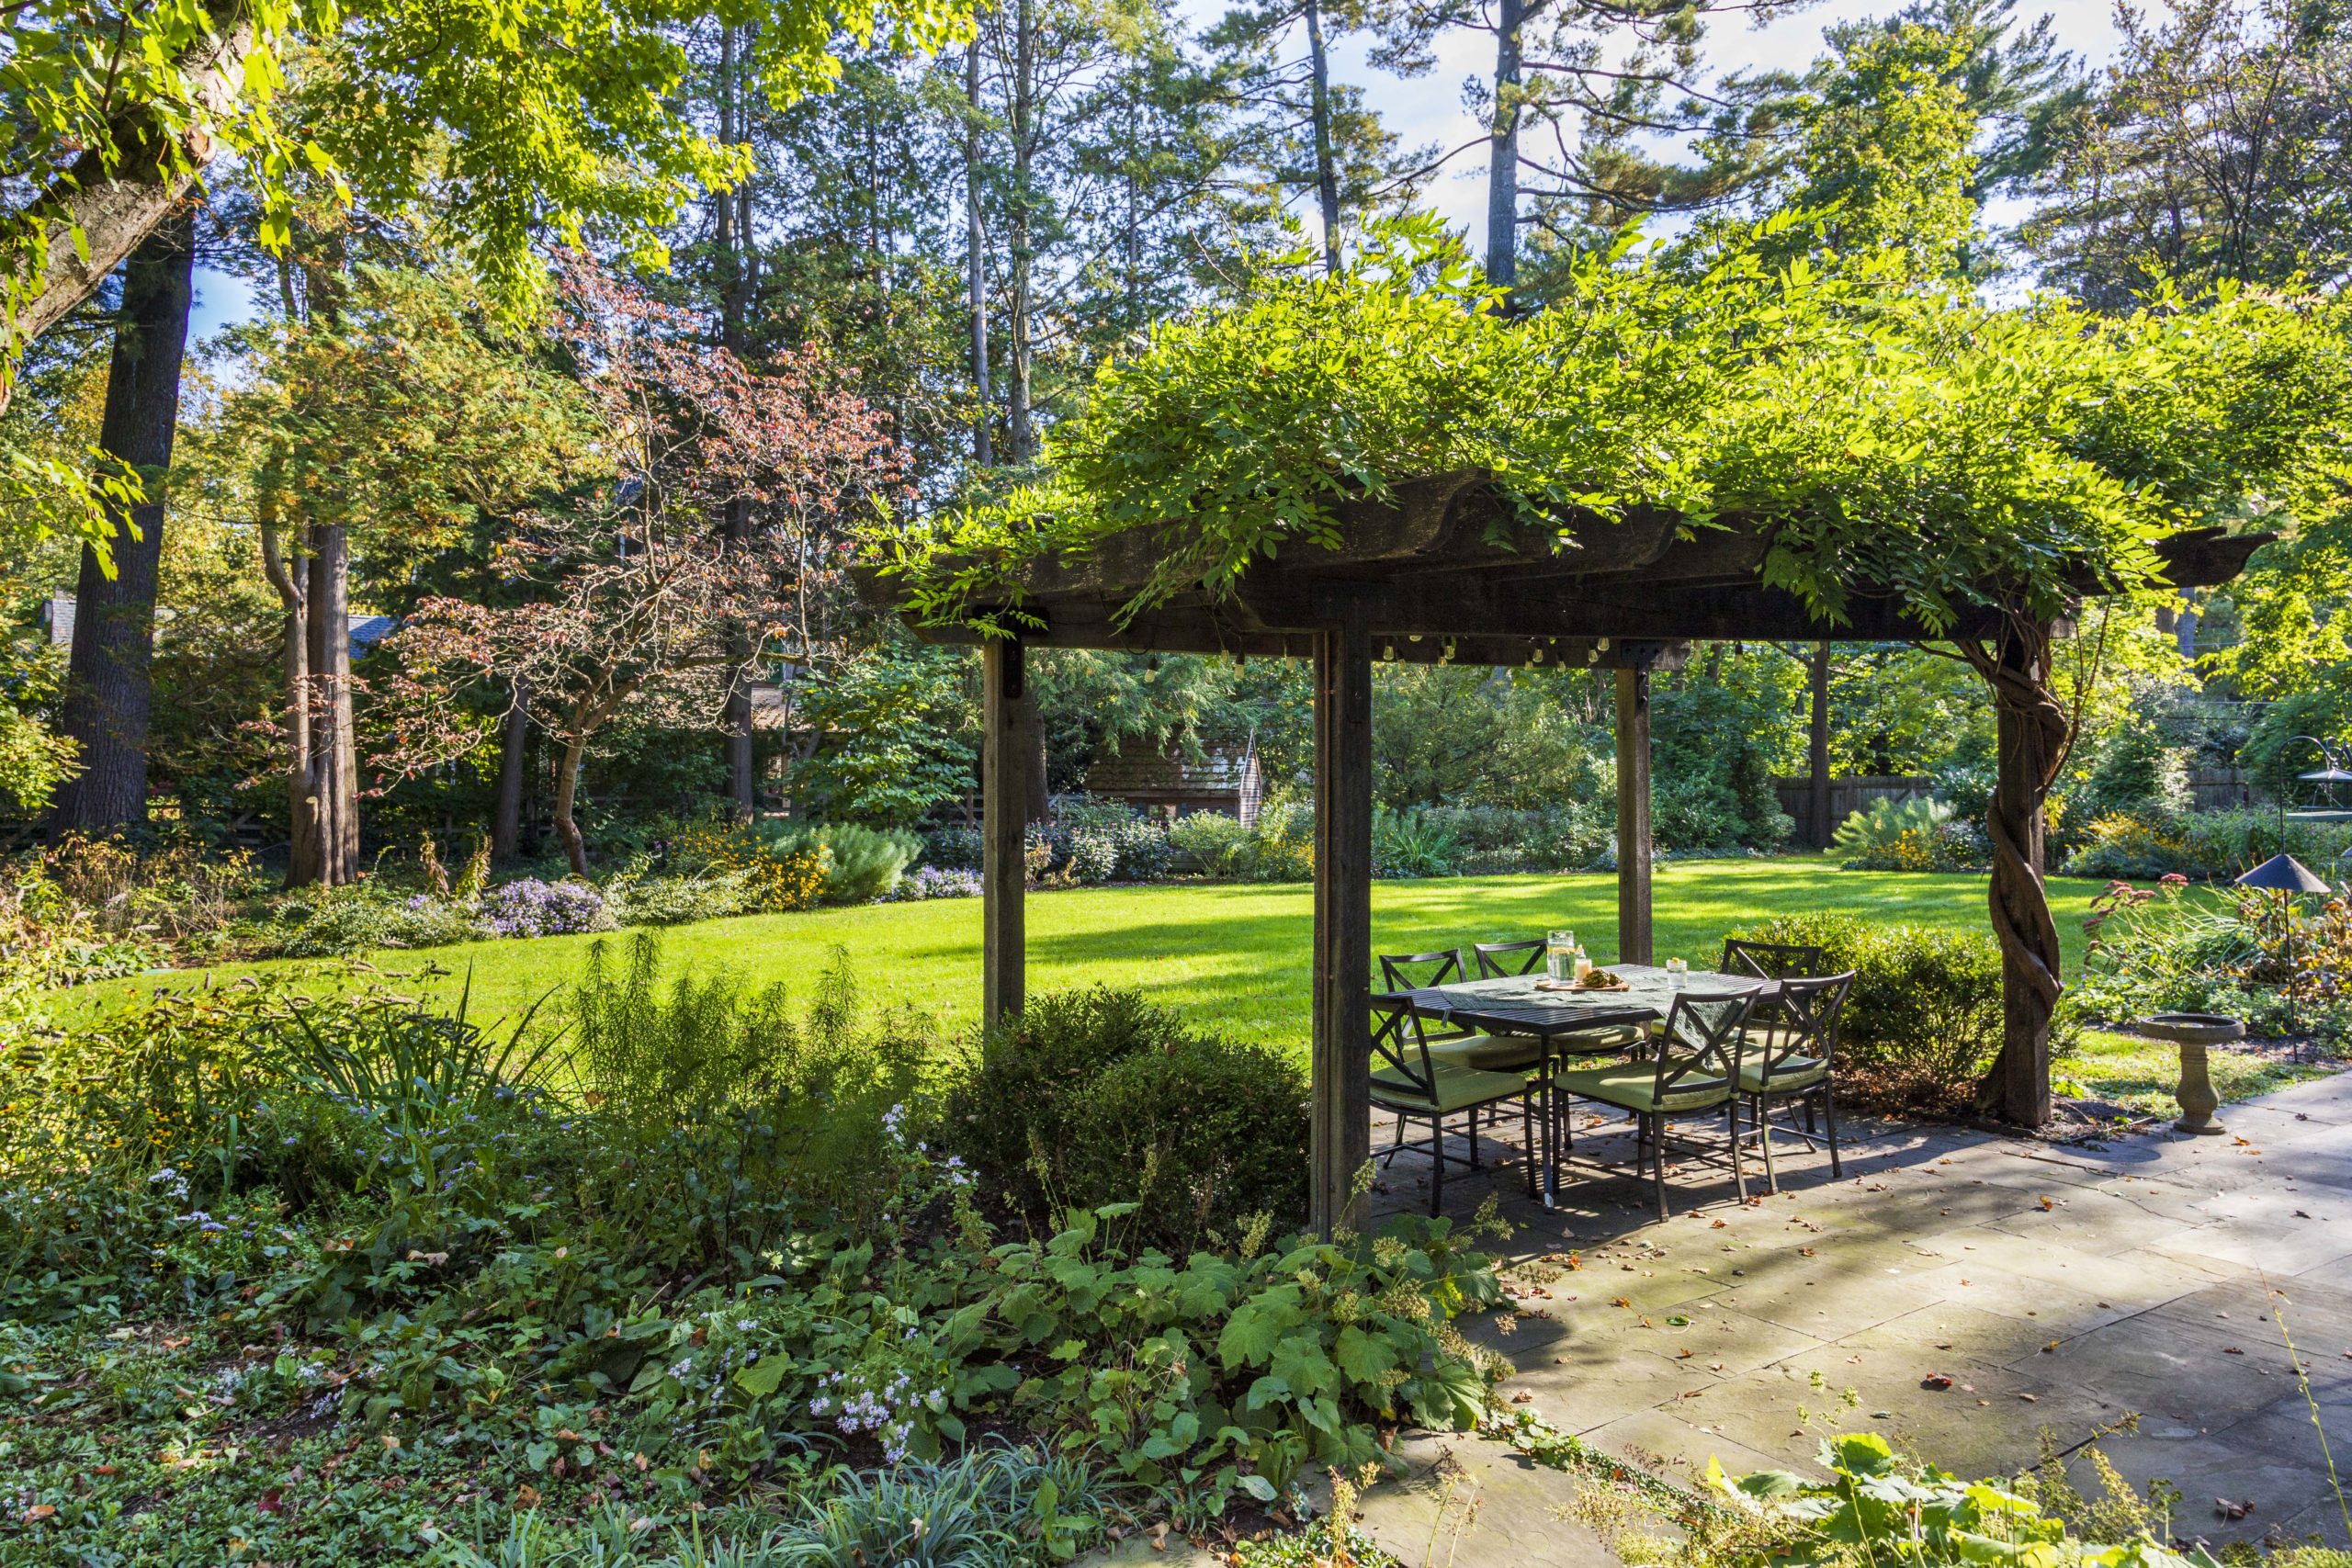 Wisteria covers a wooden pergola with a view of a lush, ellipse-shaped native perennial garden.